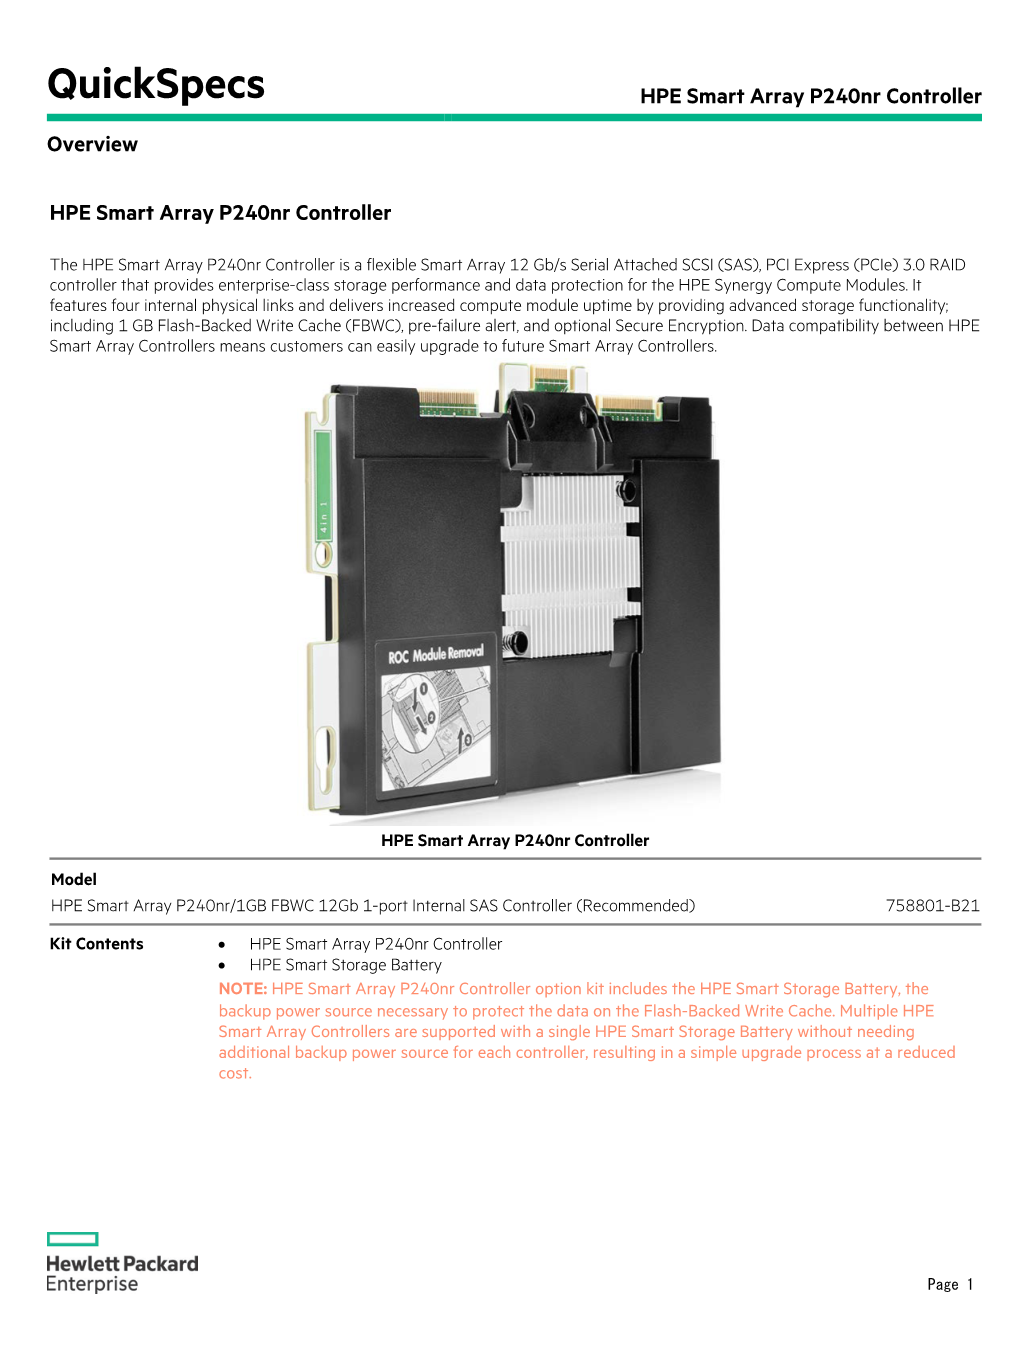 HPE Smart Array P240nr Controller Overview